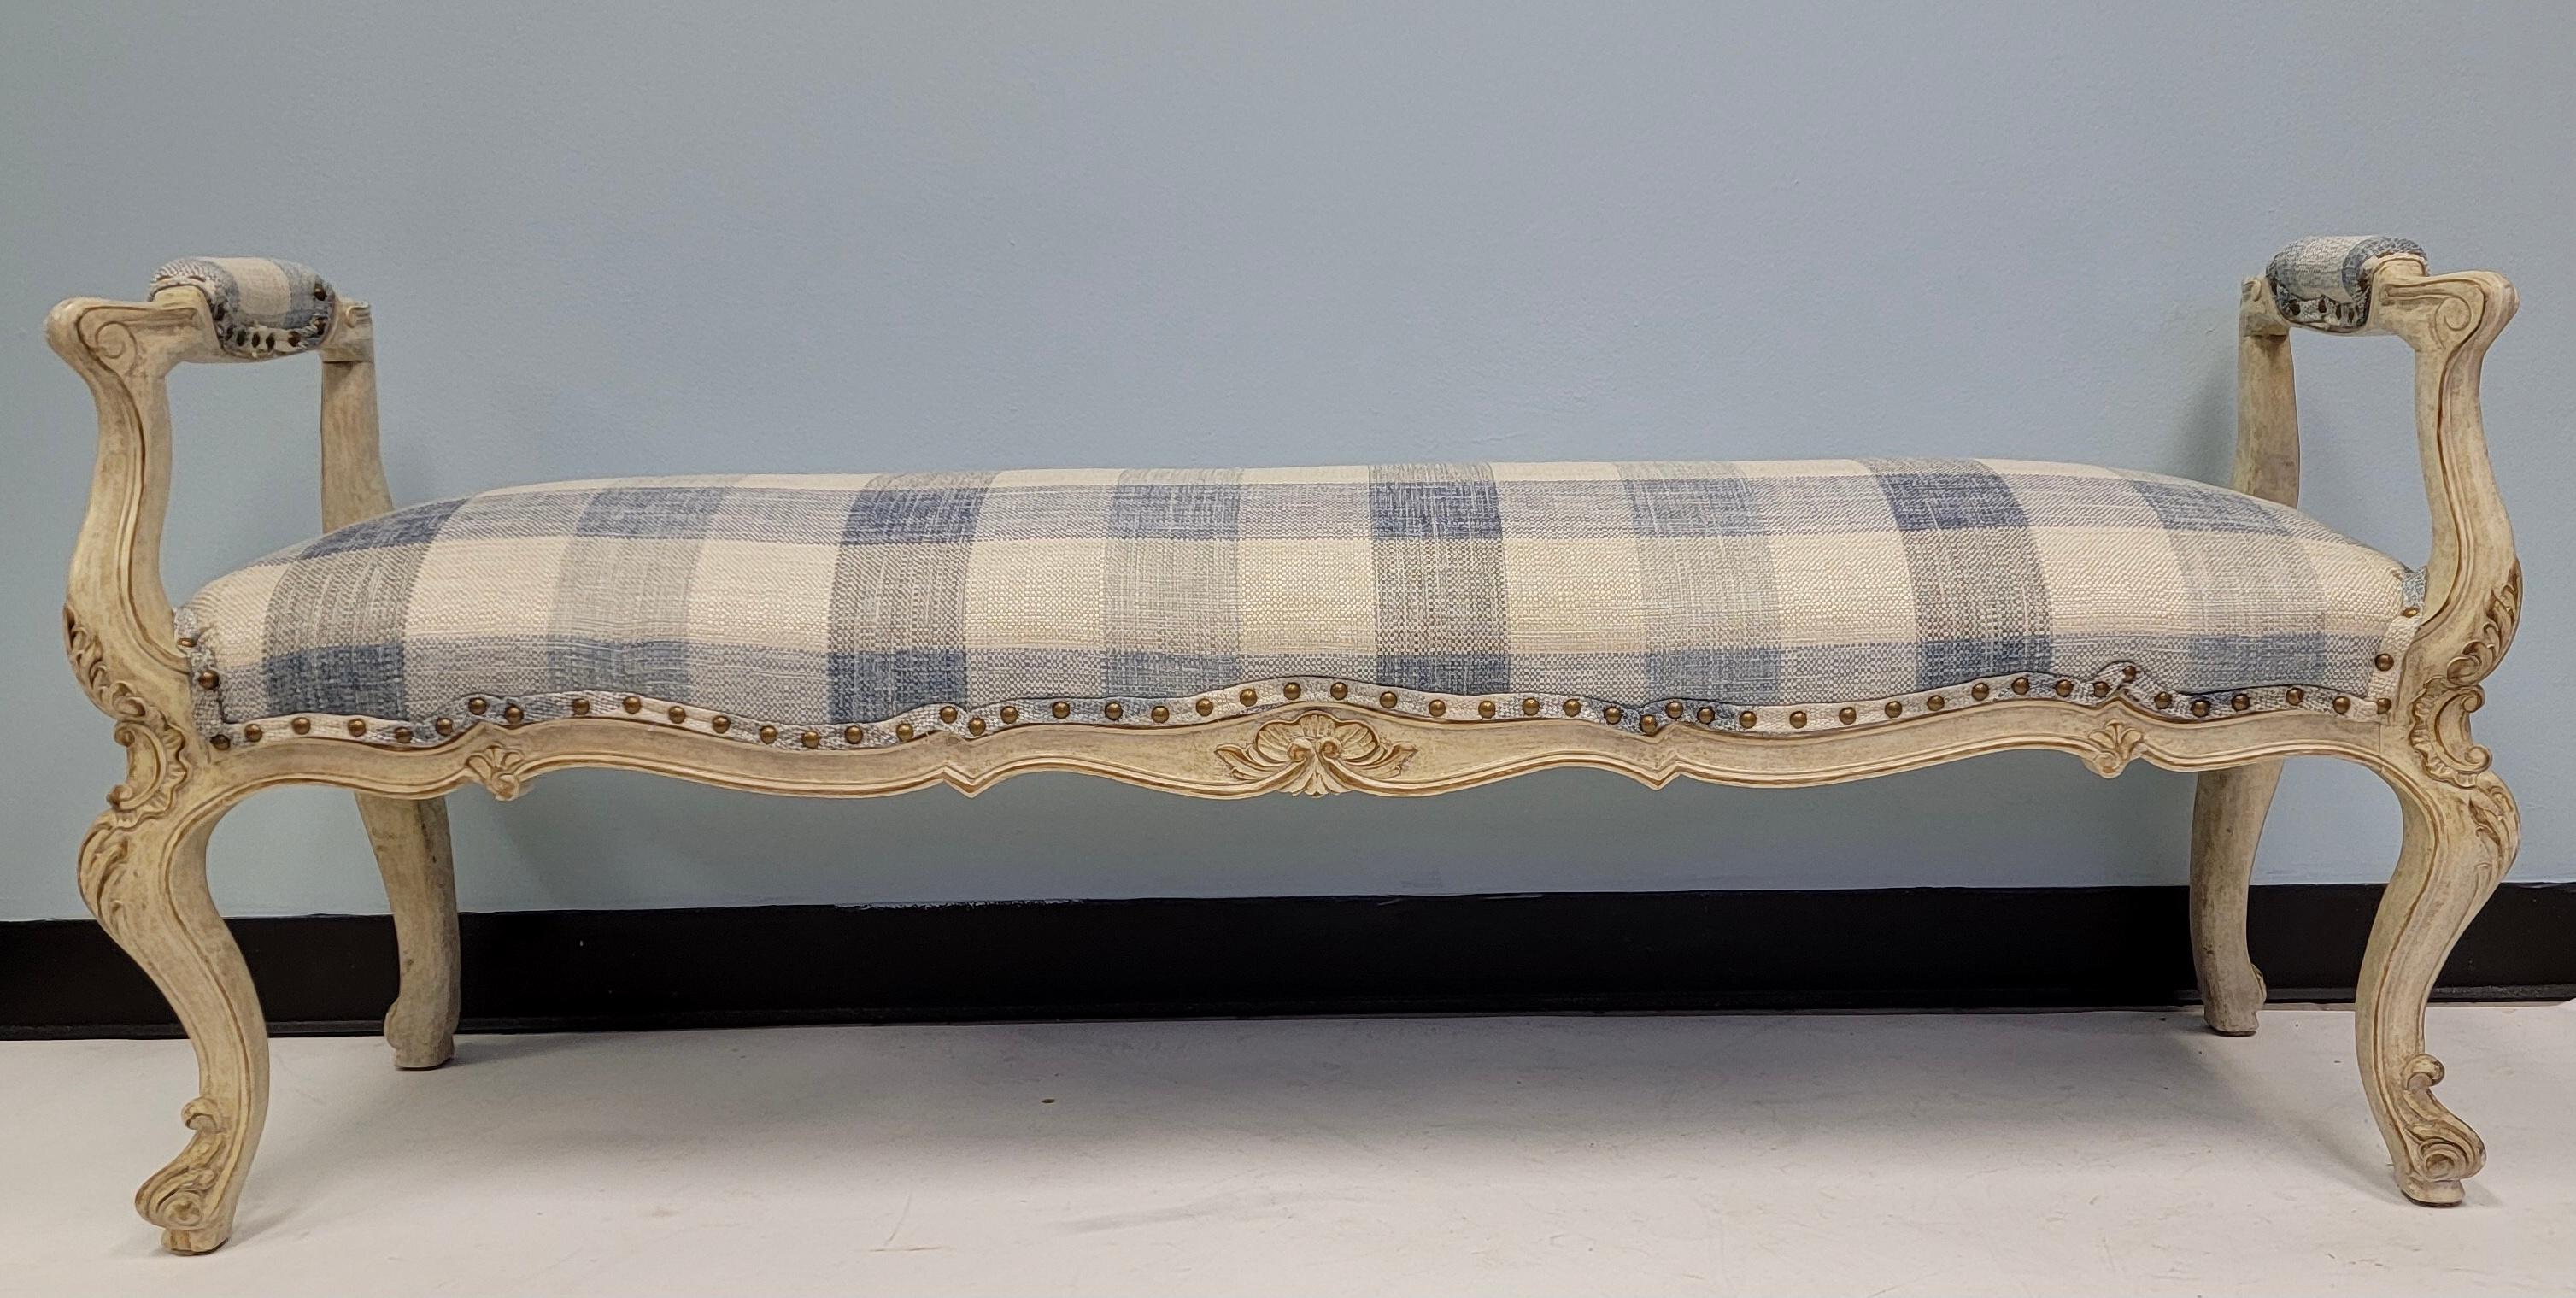 This is a lovely carved and painted French style bench upholstered in a blue and white textured linen blend upholstery. It is attributed to Lewis Mittman.